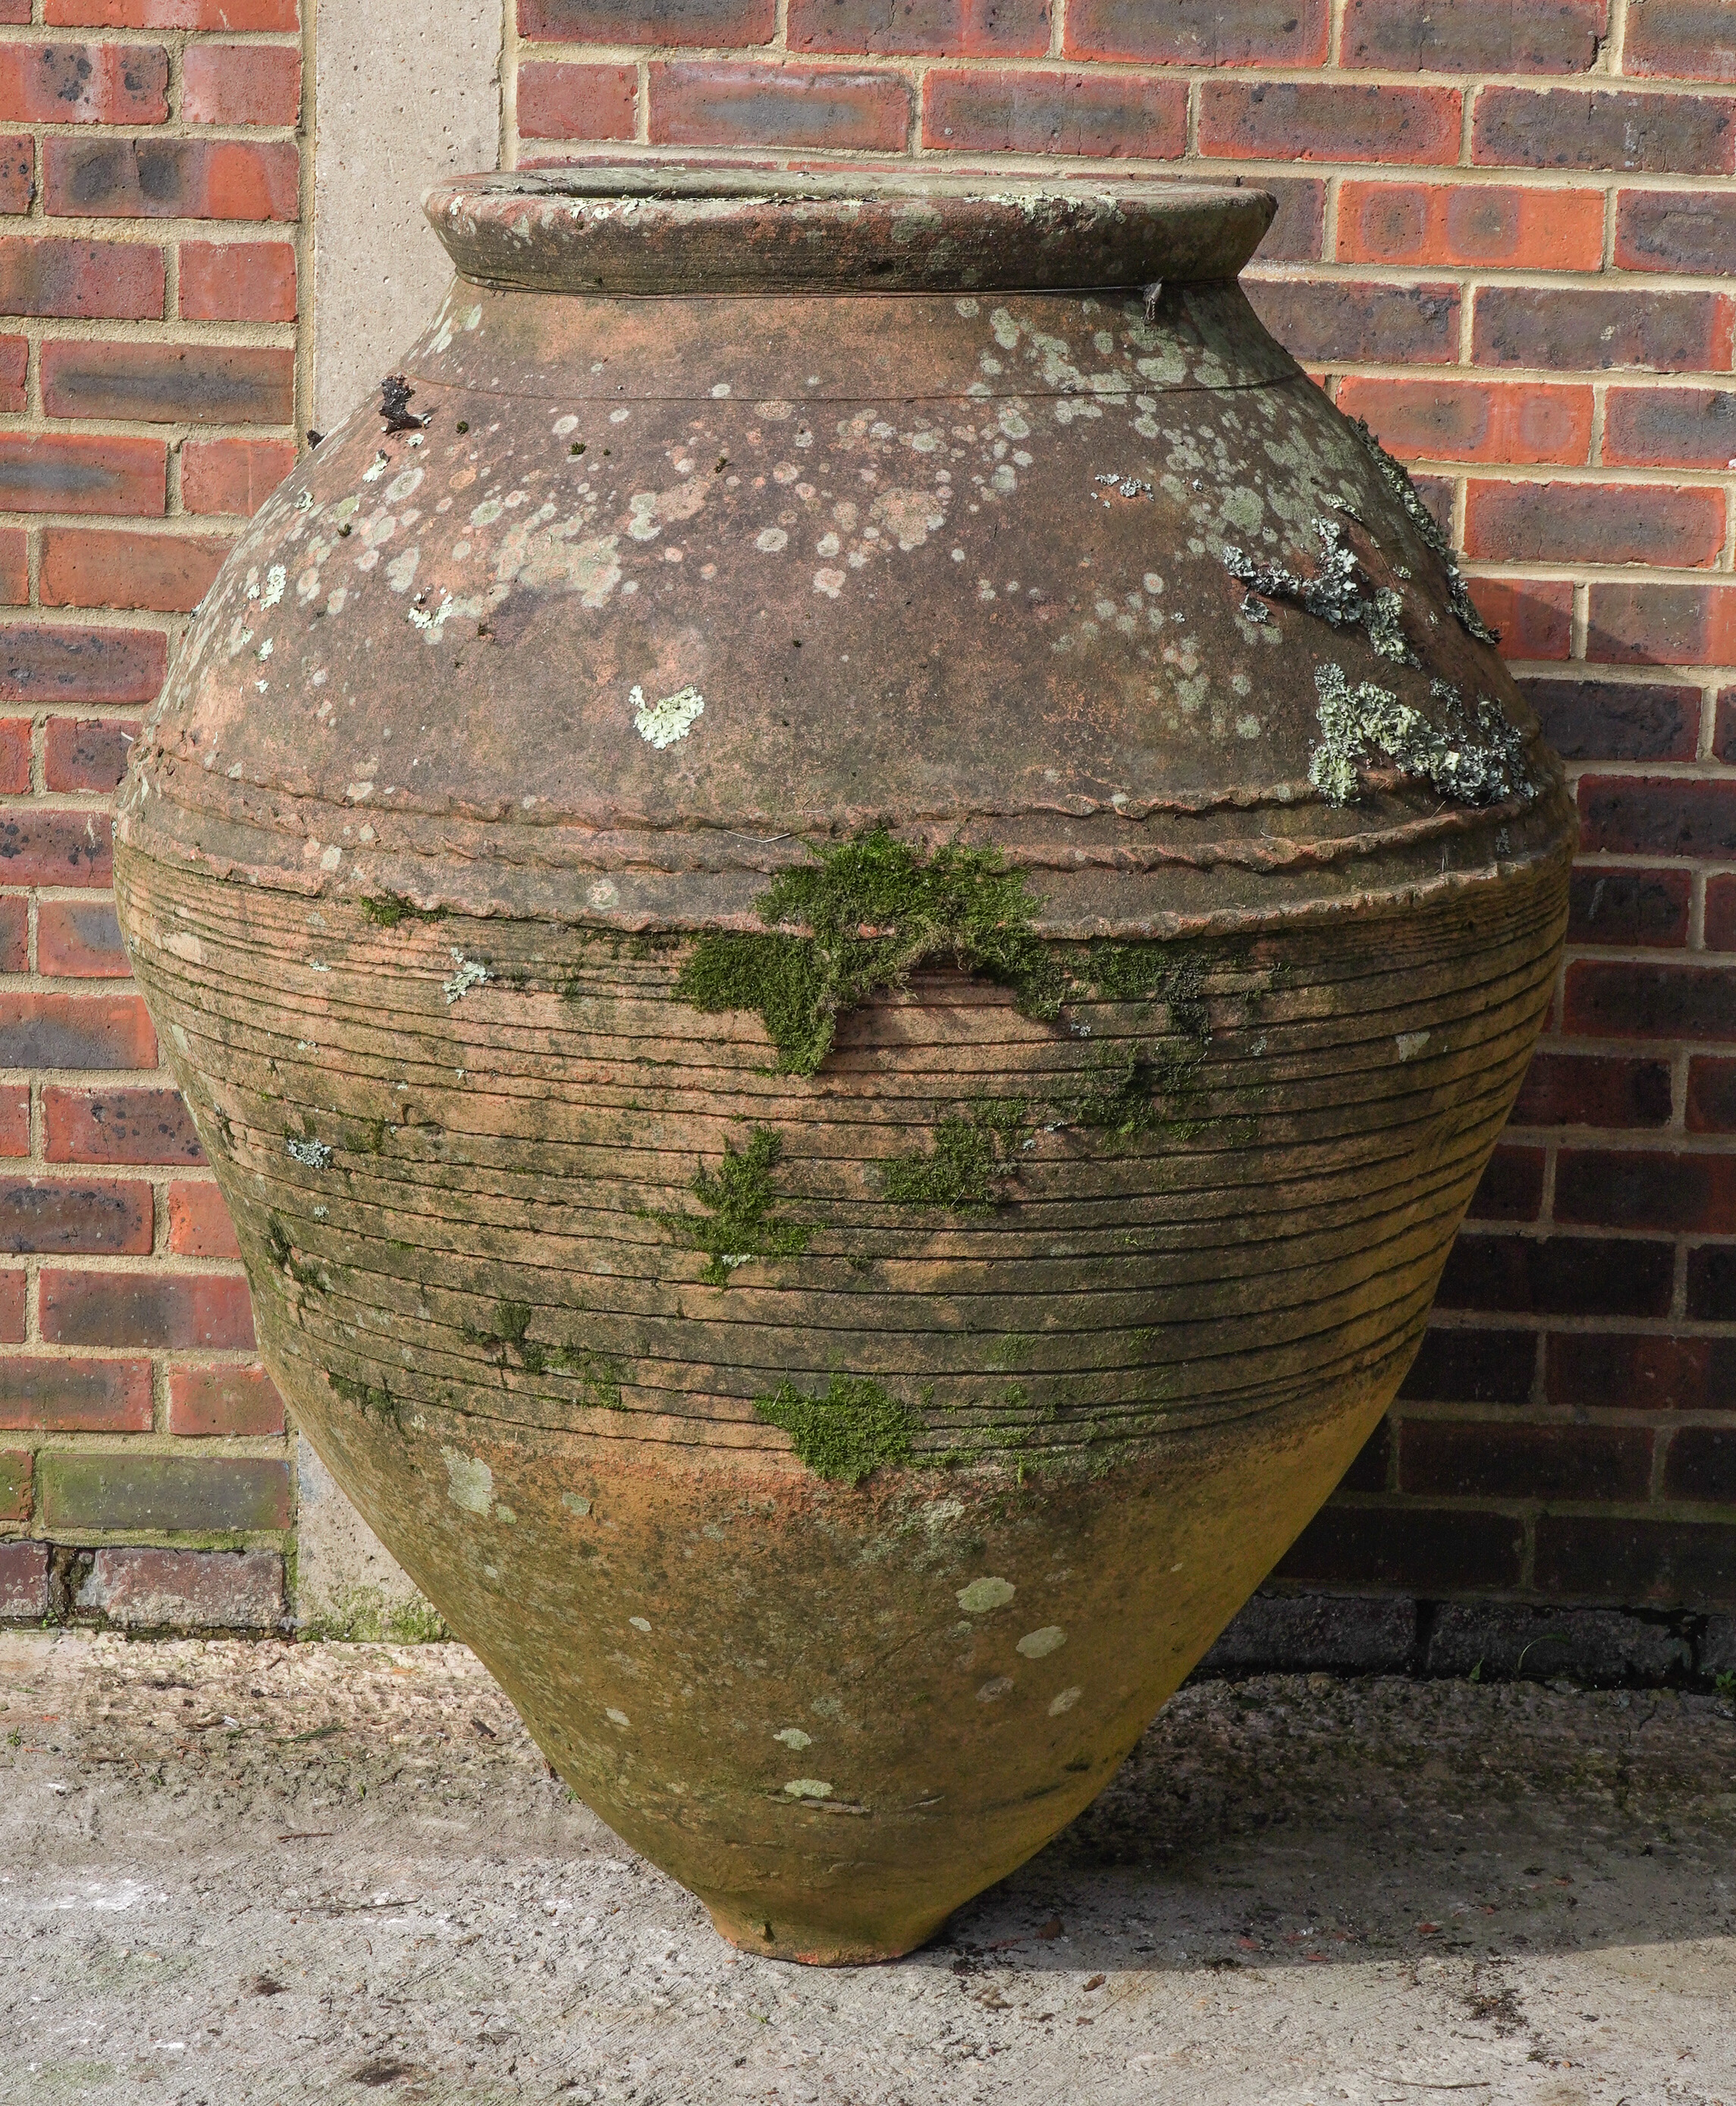 A LARGE TERRACOTTA OIL JAR - Image 2 of 4